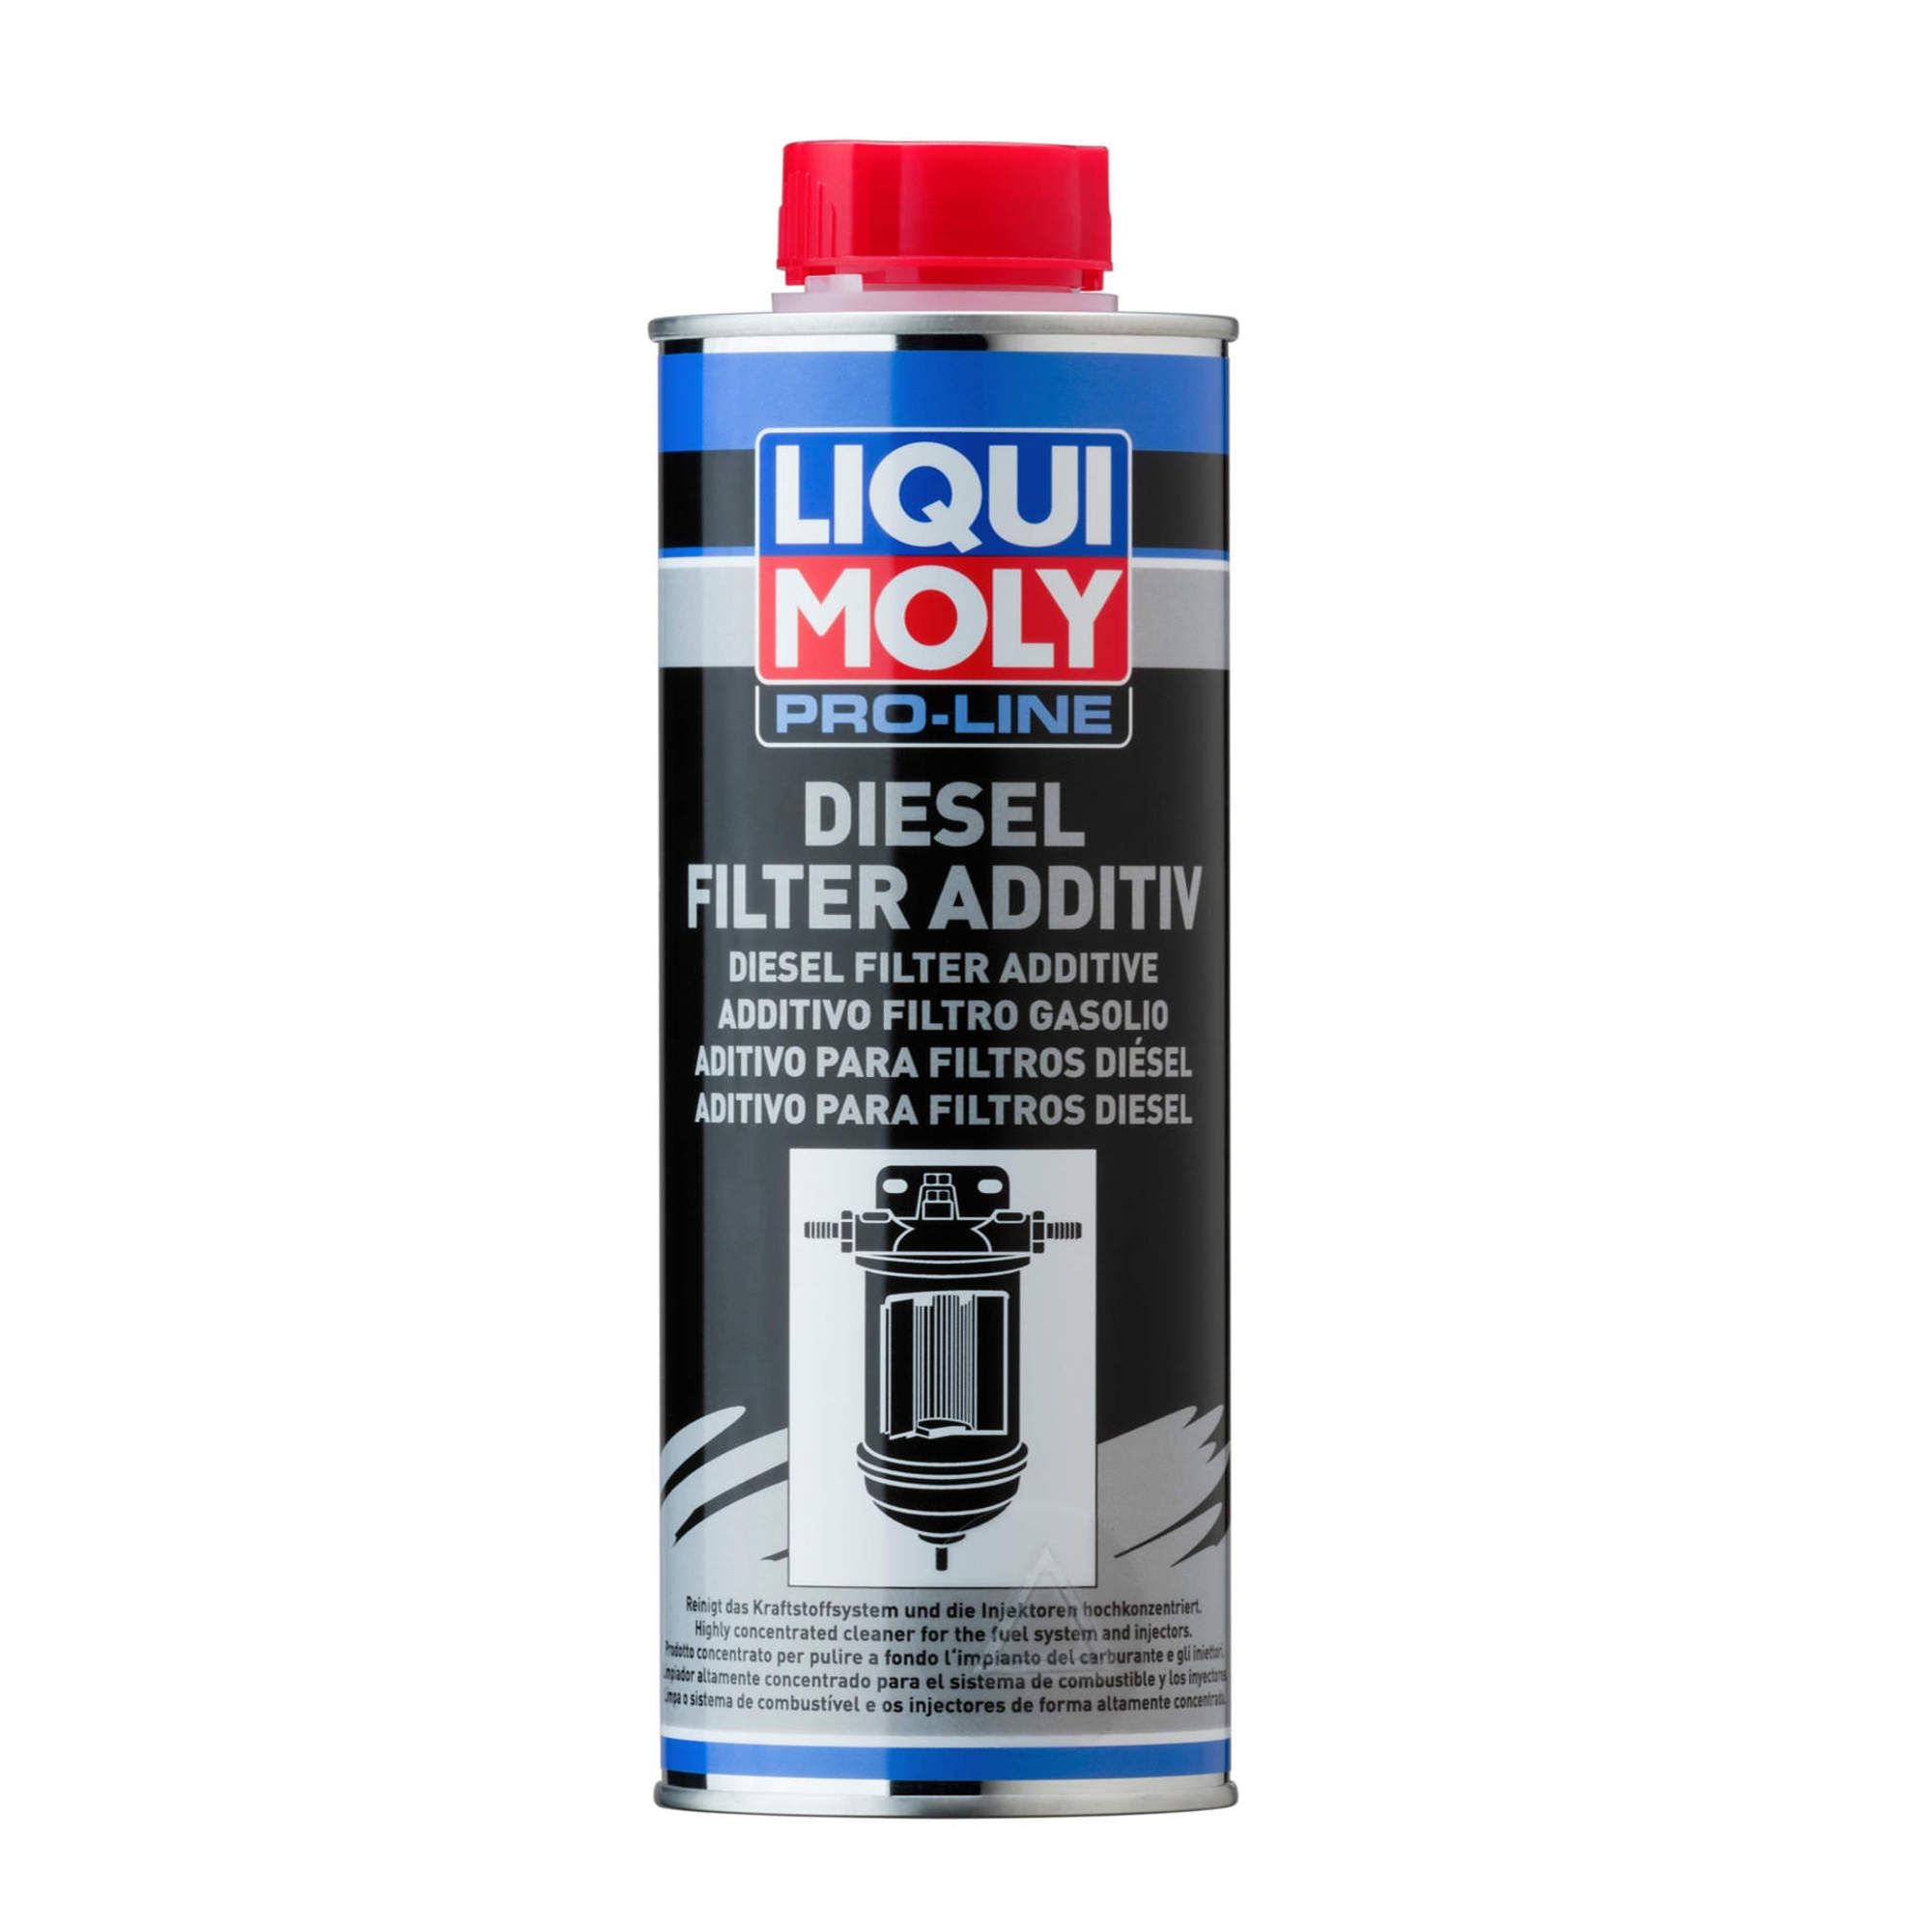 Buy Liqui Moly Pro-Line Diesel Filter Additive 500 ml at ATO24 ❗